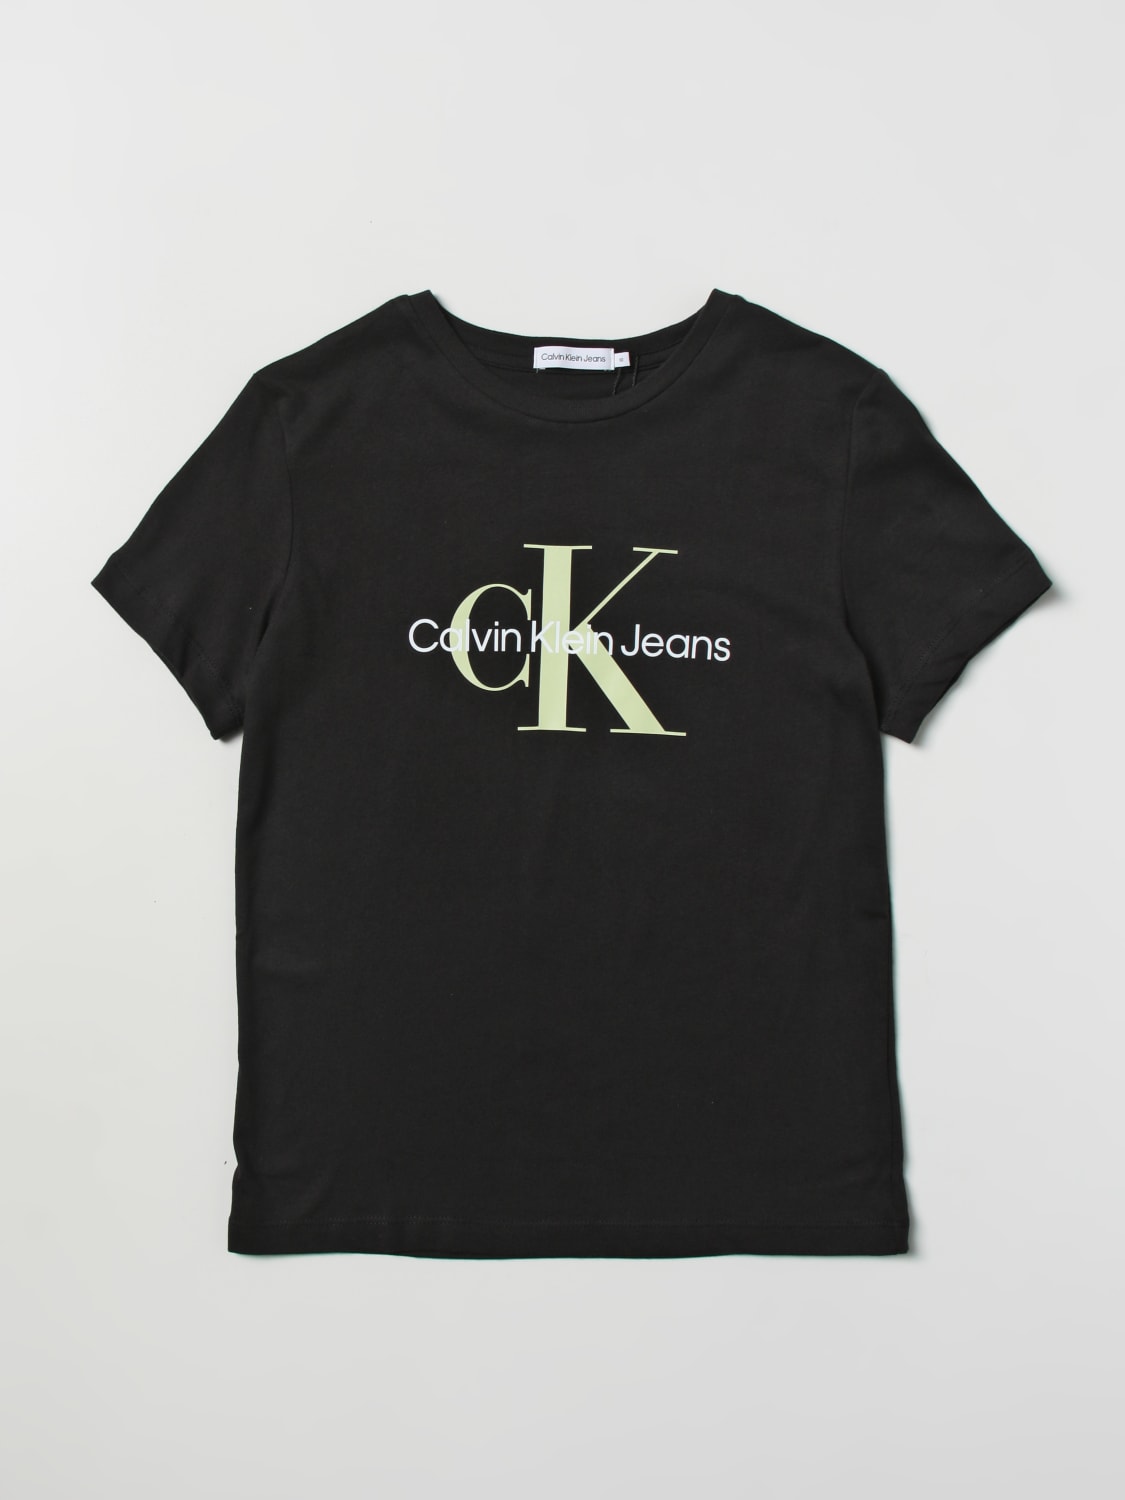 Calvin Klein Jeans INSTITUTIONAL T-SHIRT Black - Free delivery  Spartoo  NET ! - Clothing short-sleeved t-shirts Child USD/$26.40